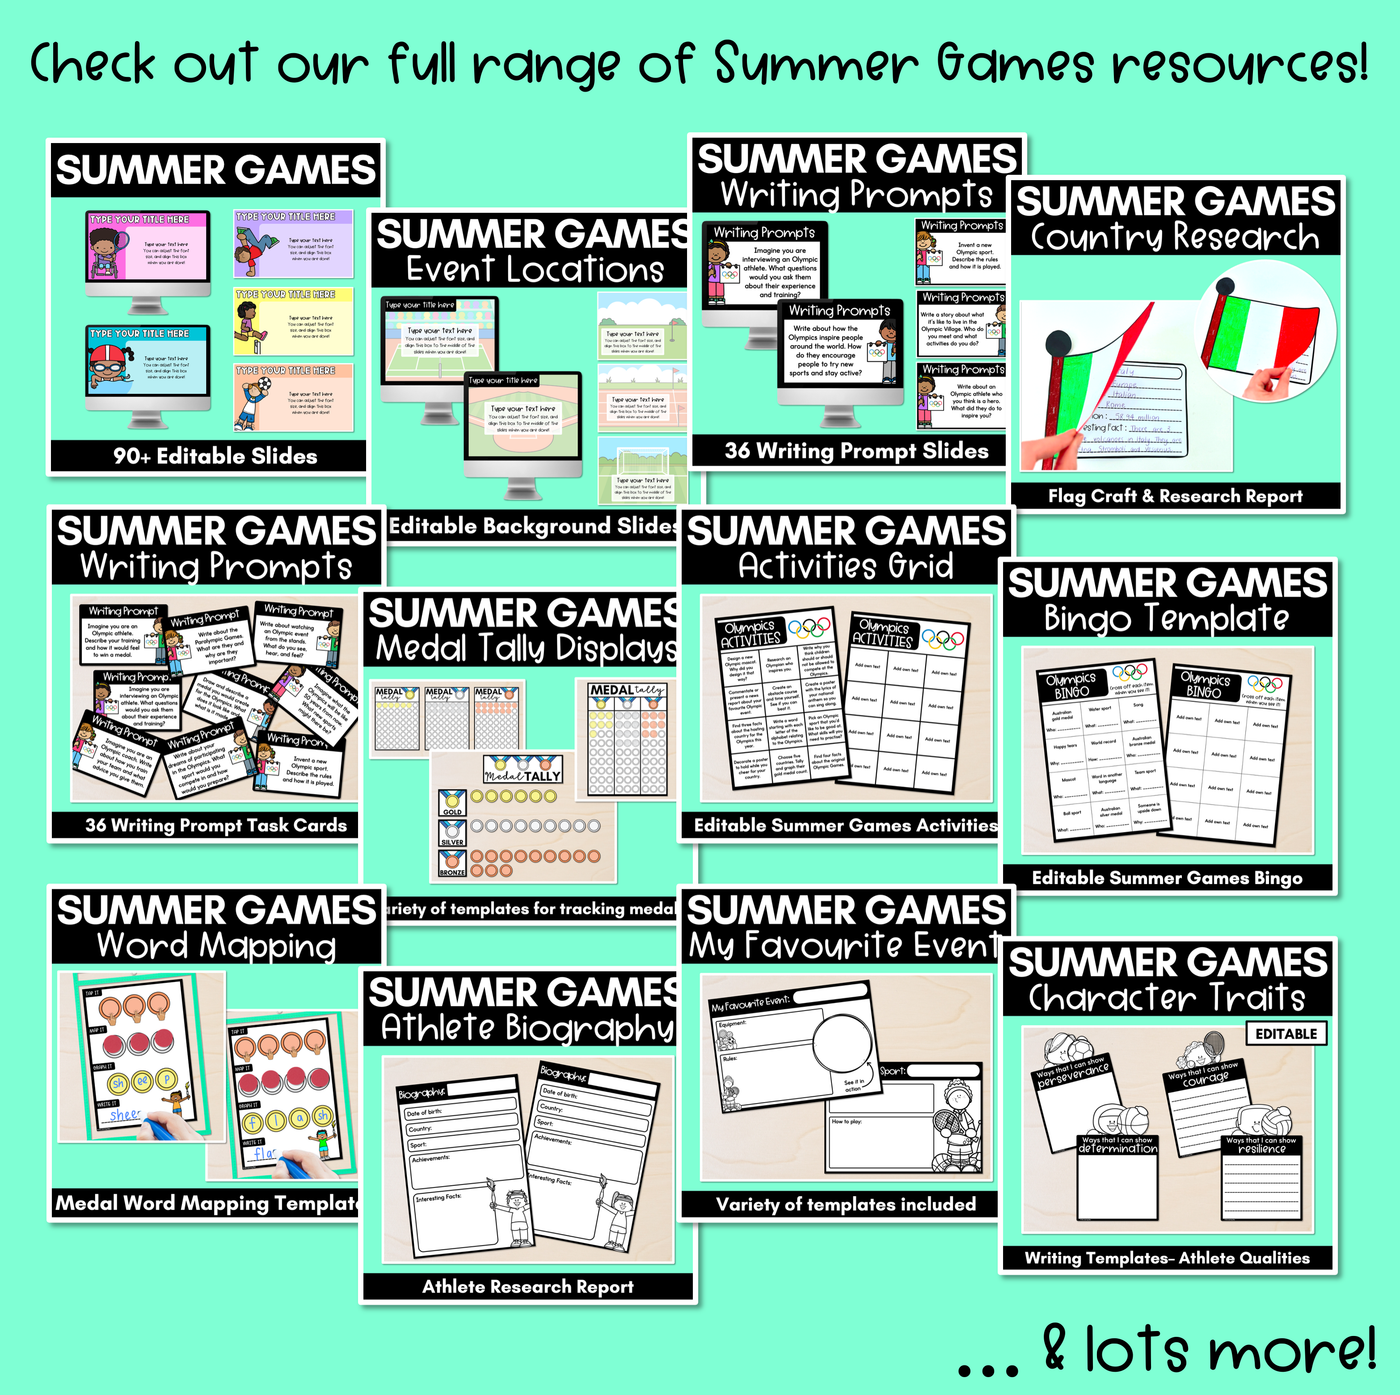 Summer Games Word Mapping Templates